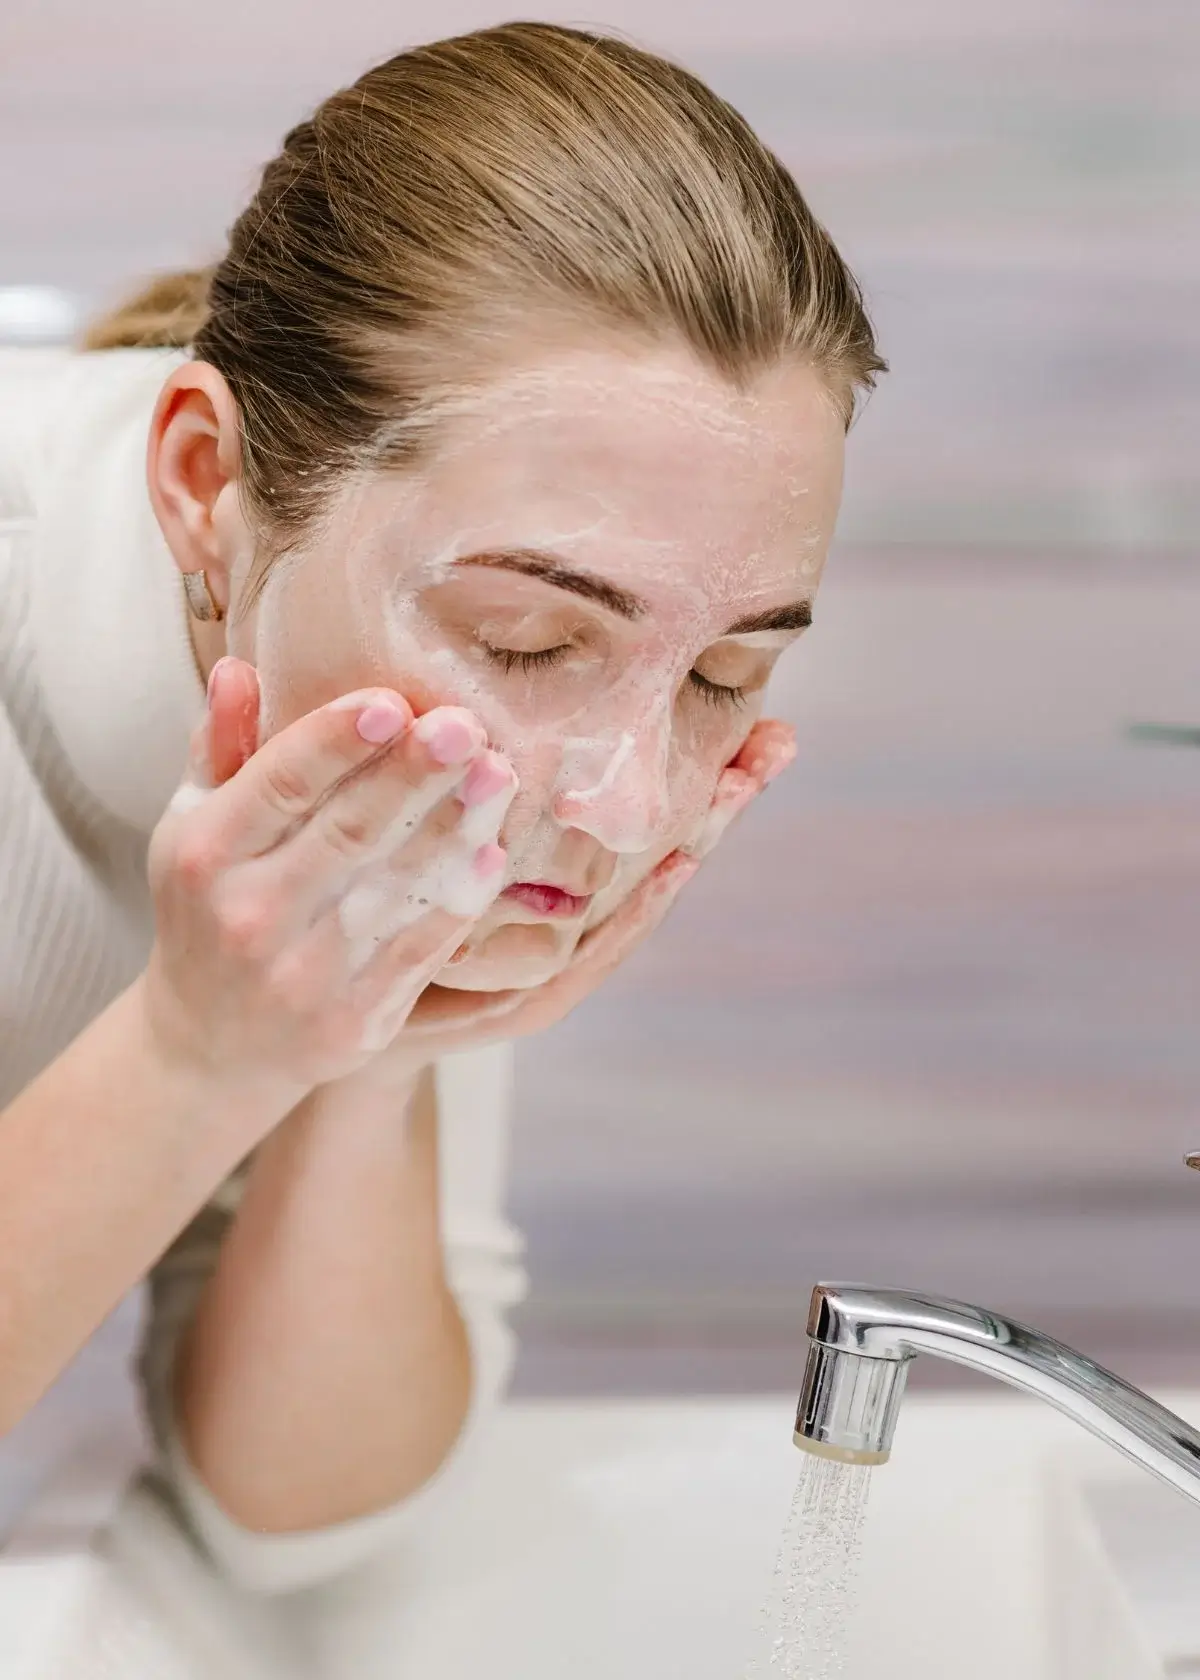 how to make face wash at home for sensitive skin?